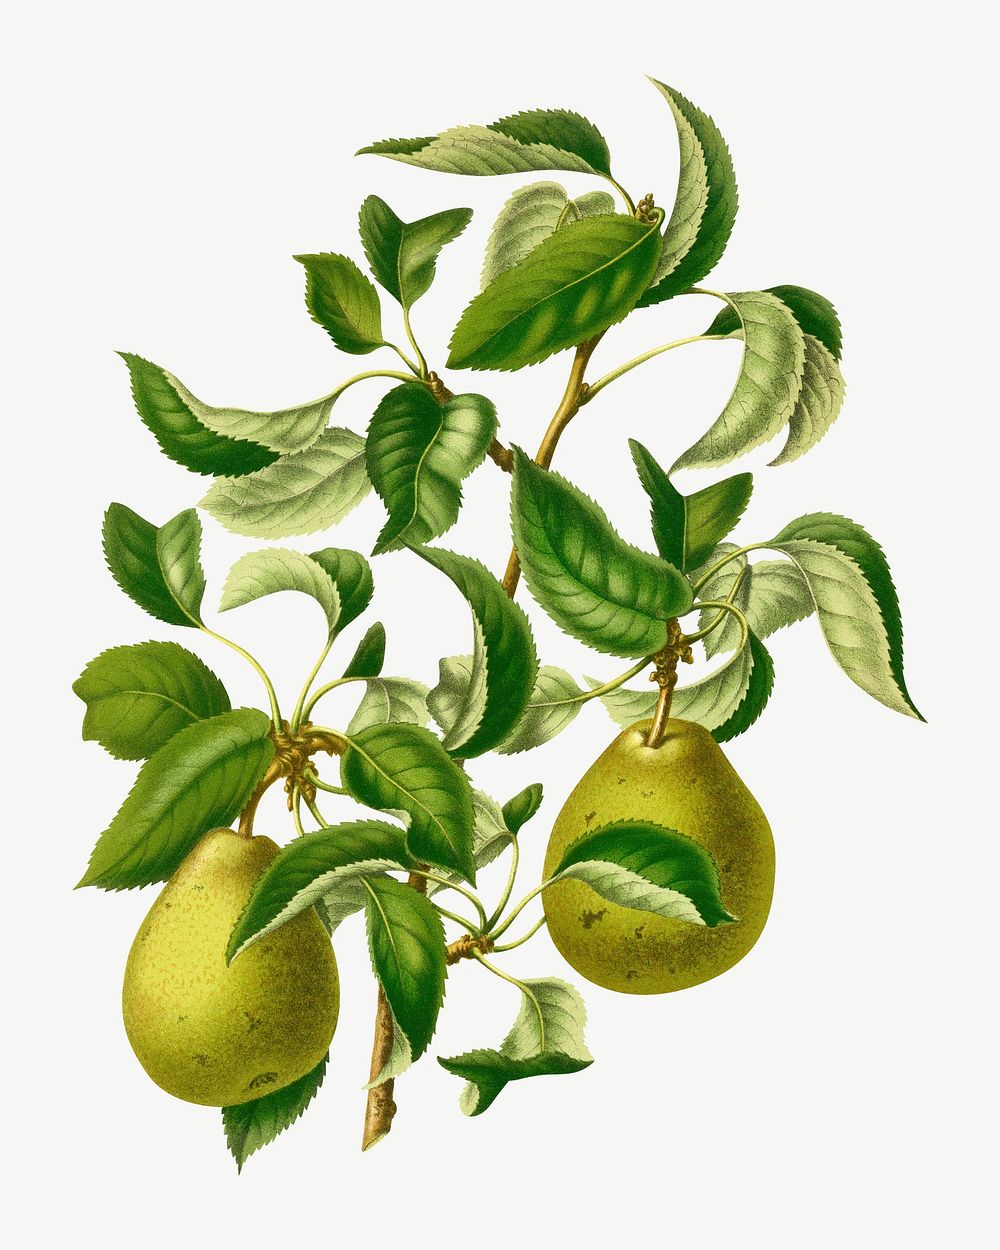 Vintage pears illustration, collage element psd. Remixed from our own original 1879 edition of Nederlandsche Flora en…